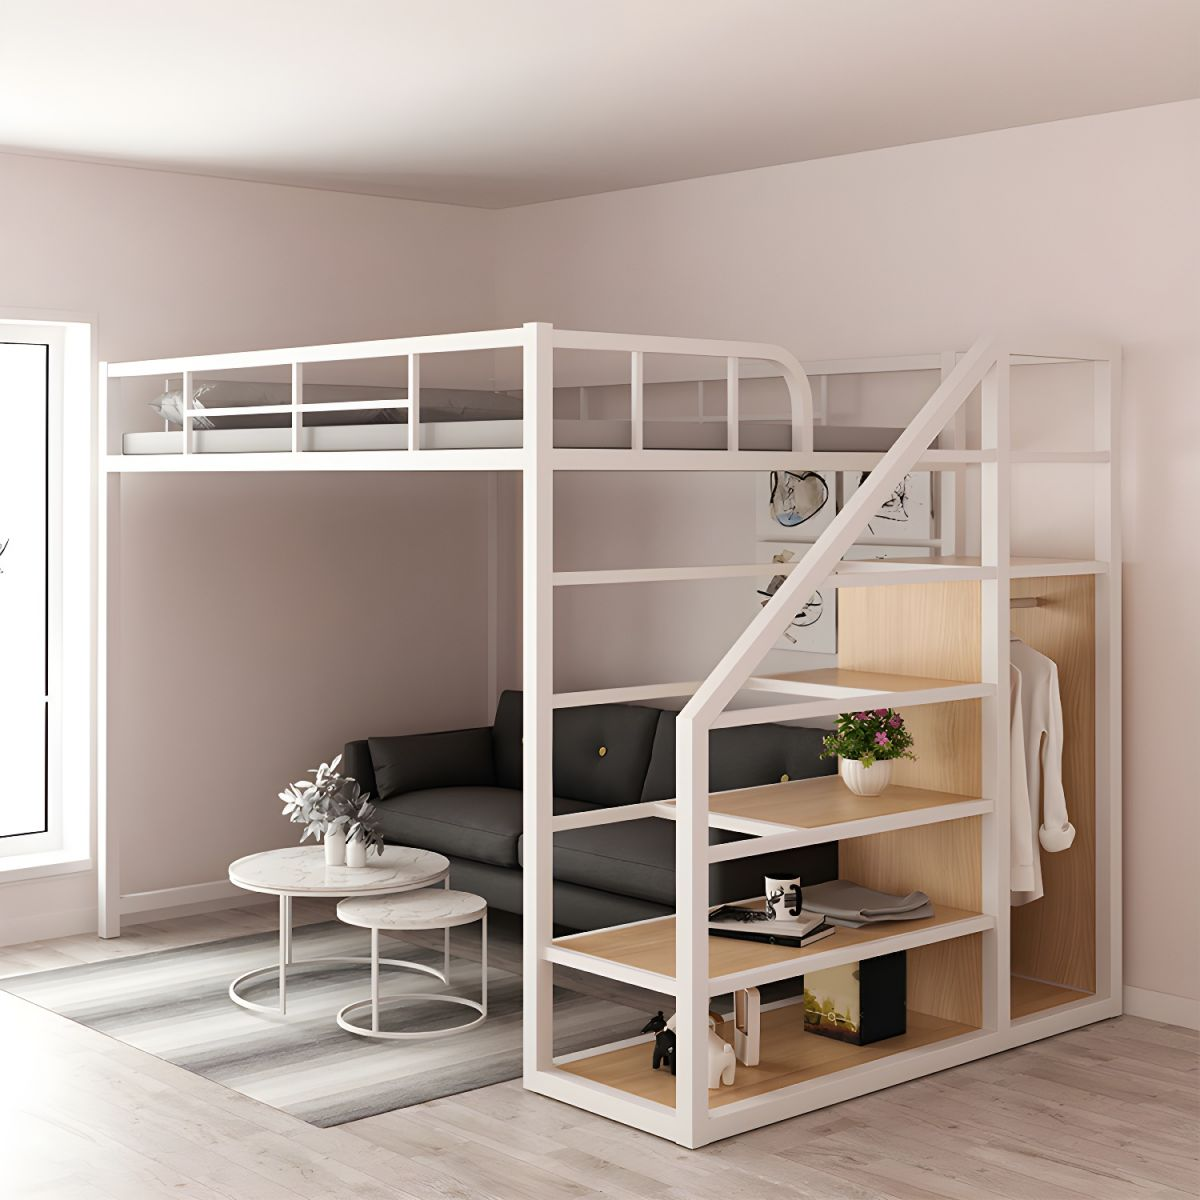 white queen size loft bed with storage shelves